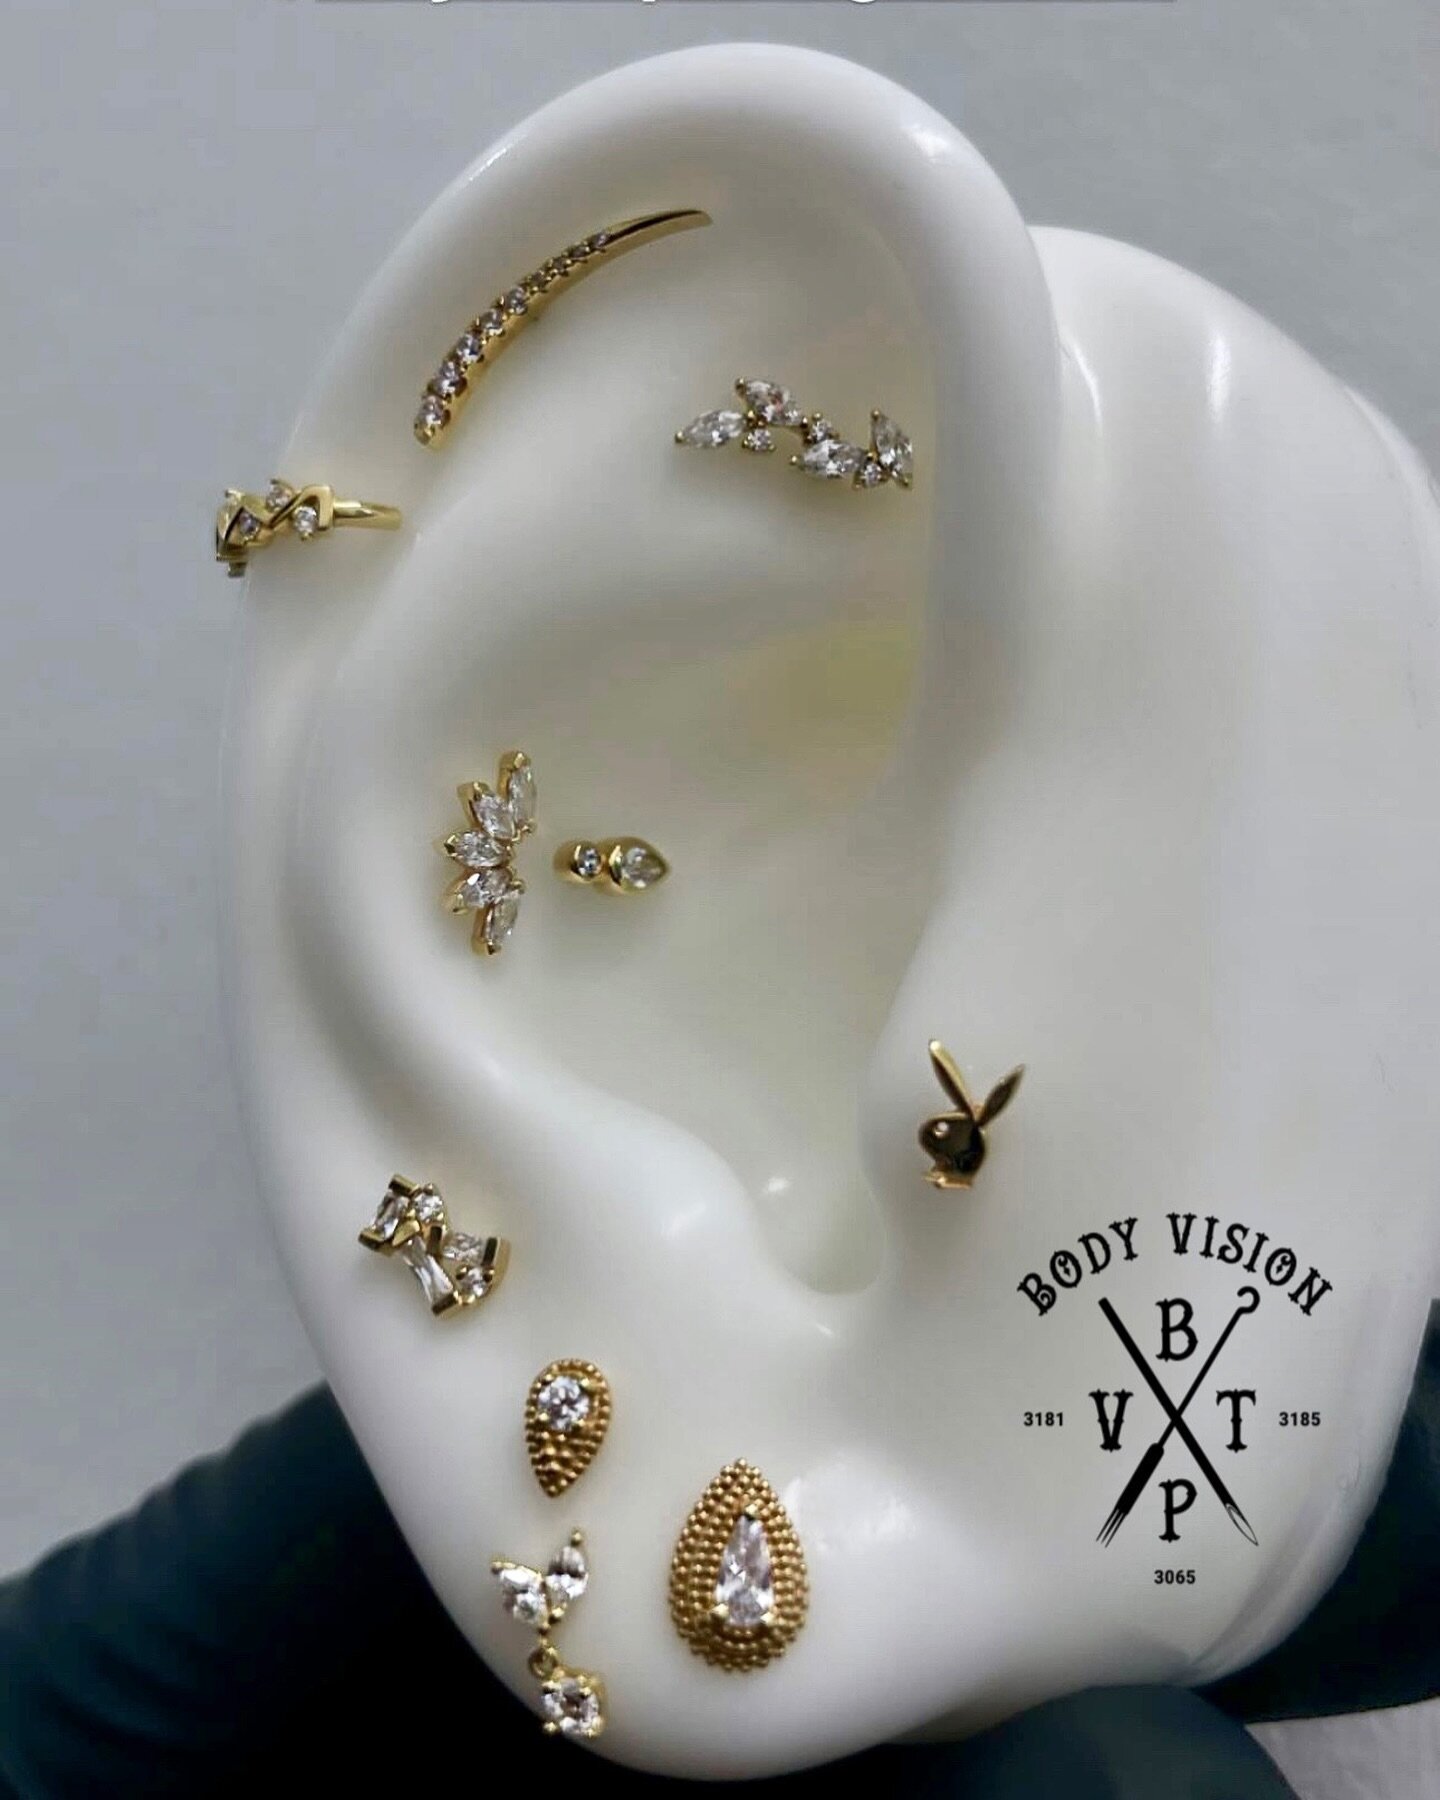 Discover exquisite personalized selections curated by our expert stylist. Book your appointment online now - find the link in our bio!
-
_
-
-
-
#piercing #piercingsmelbourne #bodypiercing #bodypiercingsmelb #realpiercers #piercersau #piercingsau #pi